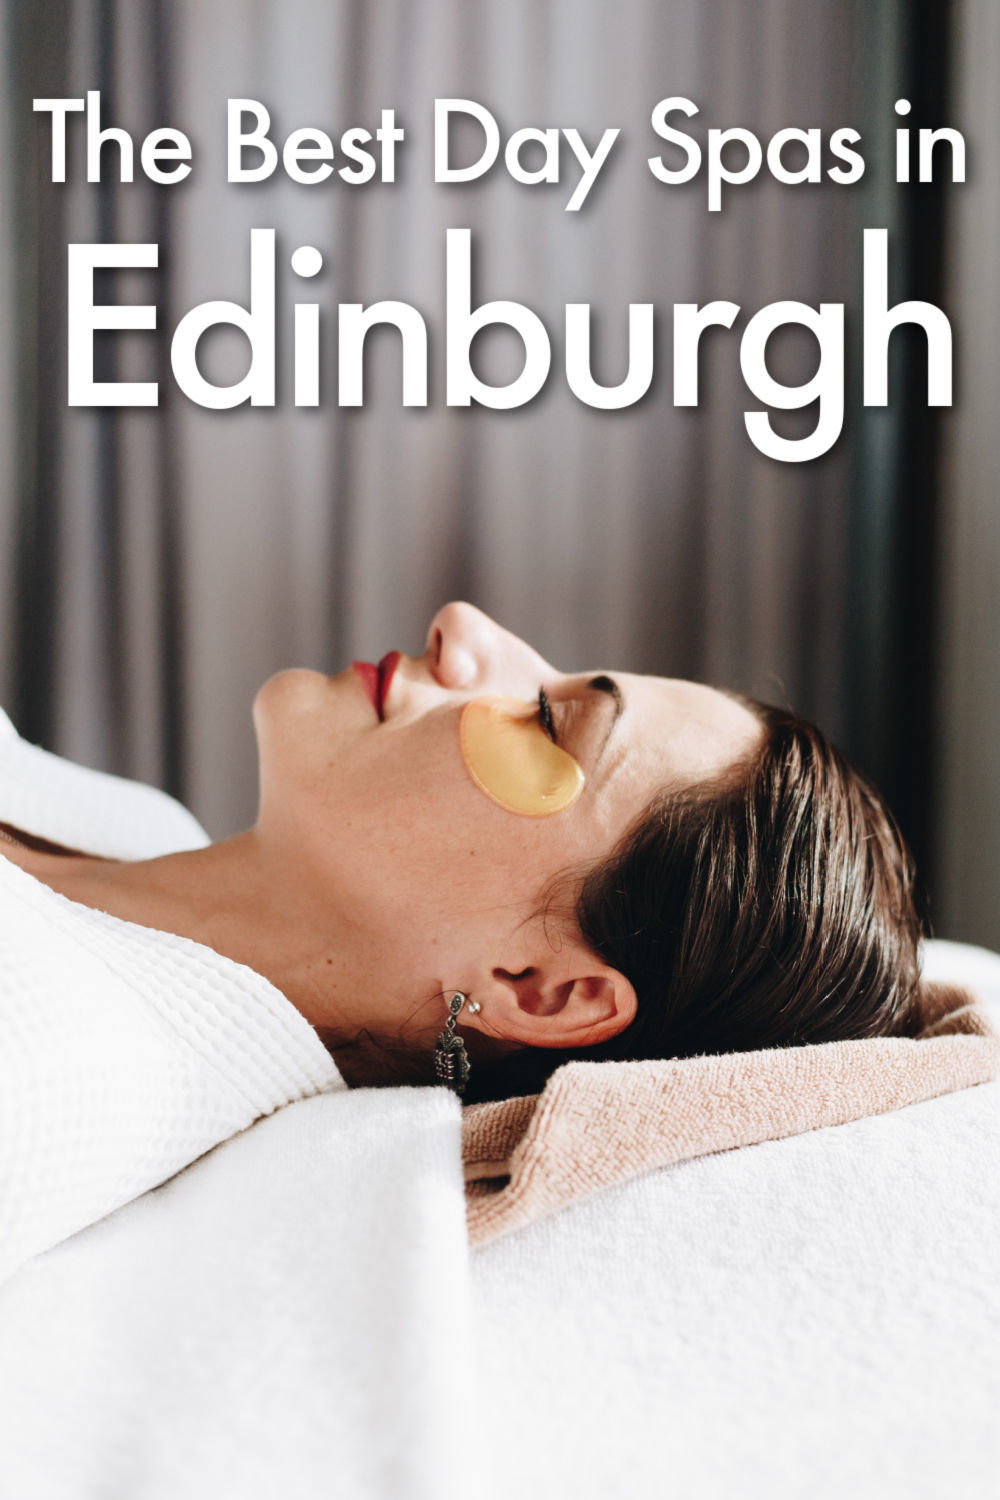 Relax Time! Here are some of the best spas in Edinburgh, Scotland. We listed the best places to go for a day spa in Edinburgh, from traditional massages to top-notch treatments, saunas, gyms and much more. You trip to Edinburgh just got better and more relaxing with these hotels, spas and treatments suggestions. 